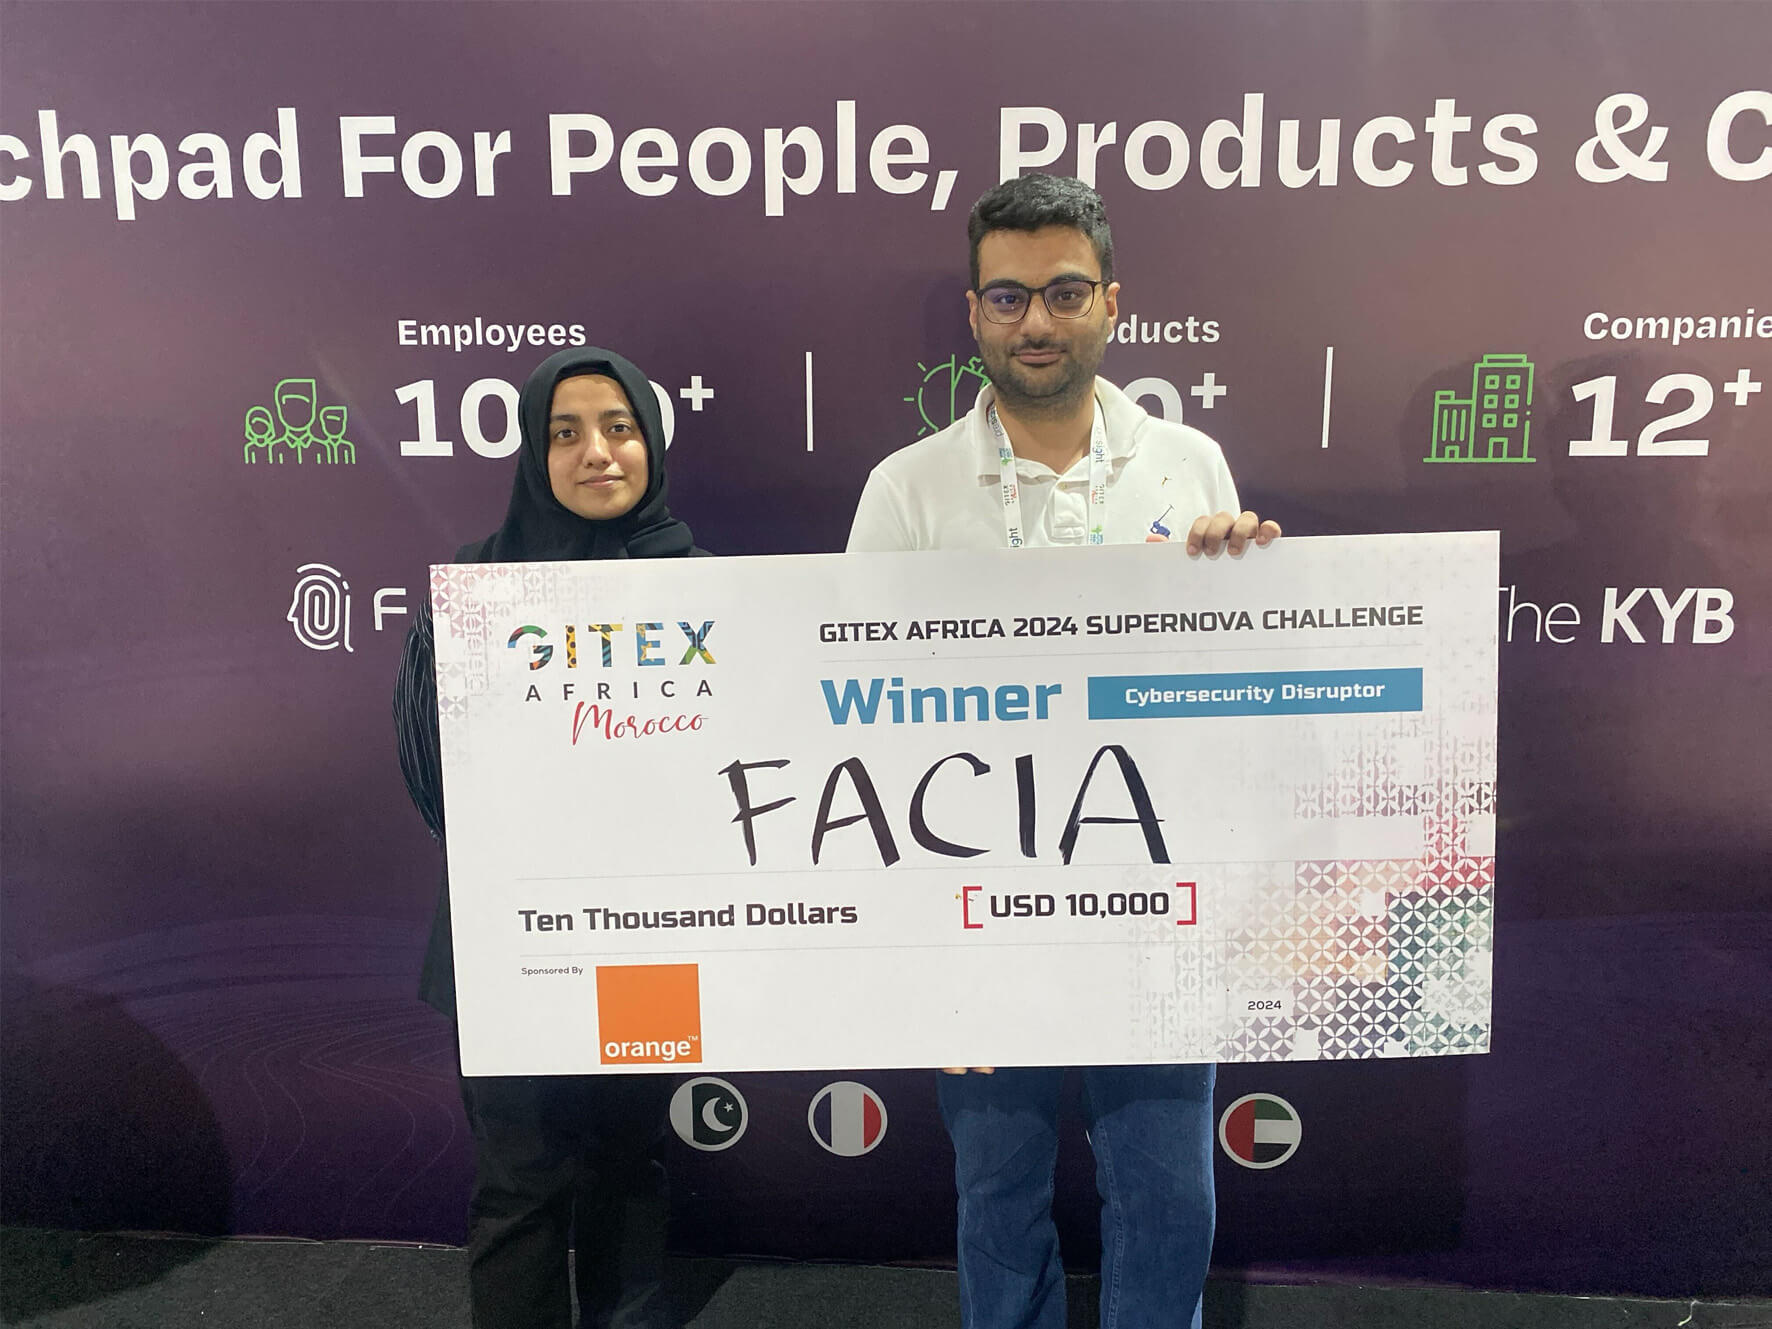 FACIA is Proud to announce its achievement of winning the GITEX Africa Morocco 2024 in the cybersecurity category as a ‘cybersecurity disruptor’.